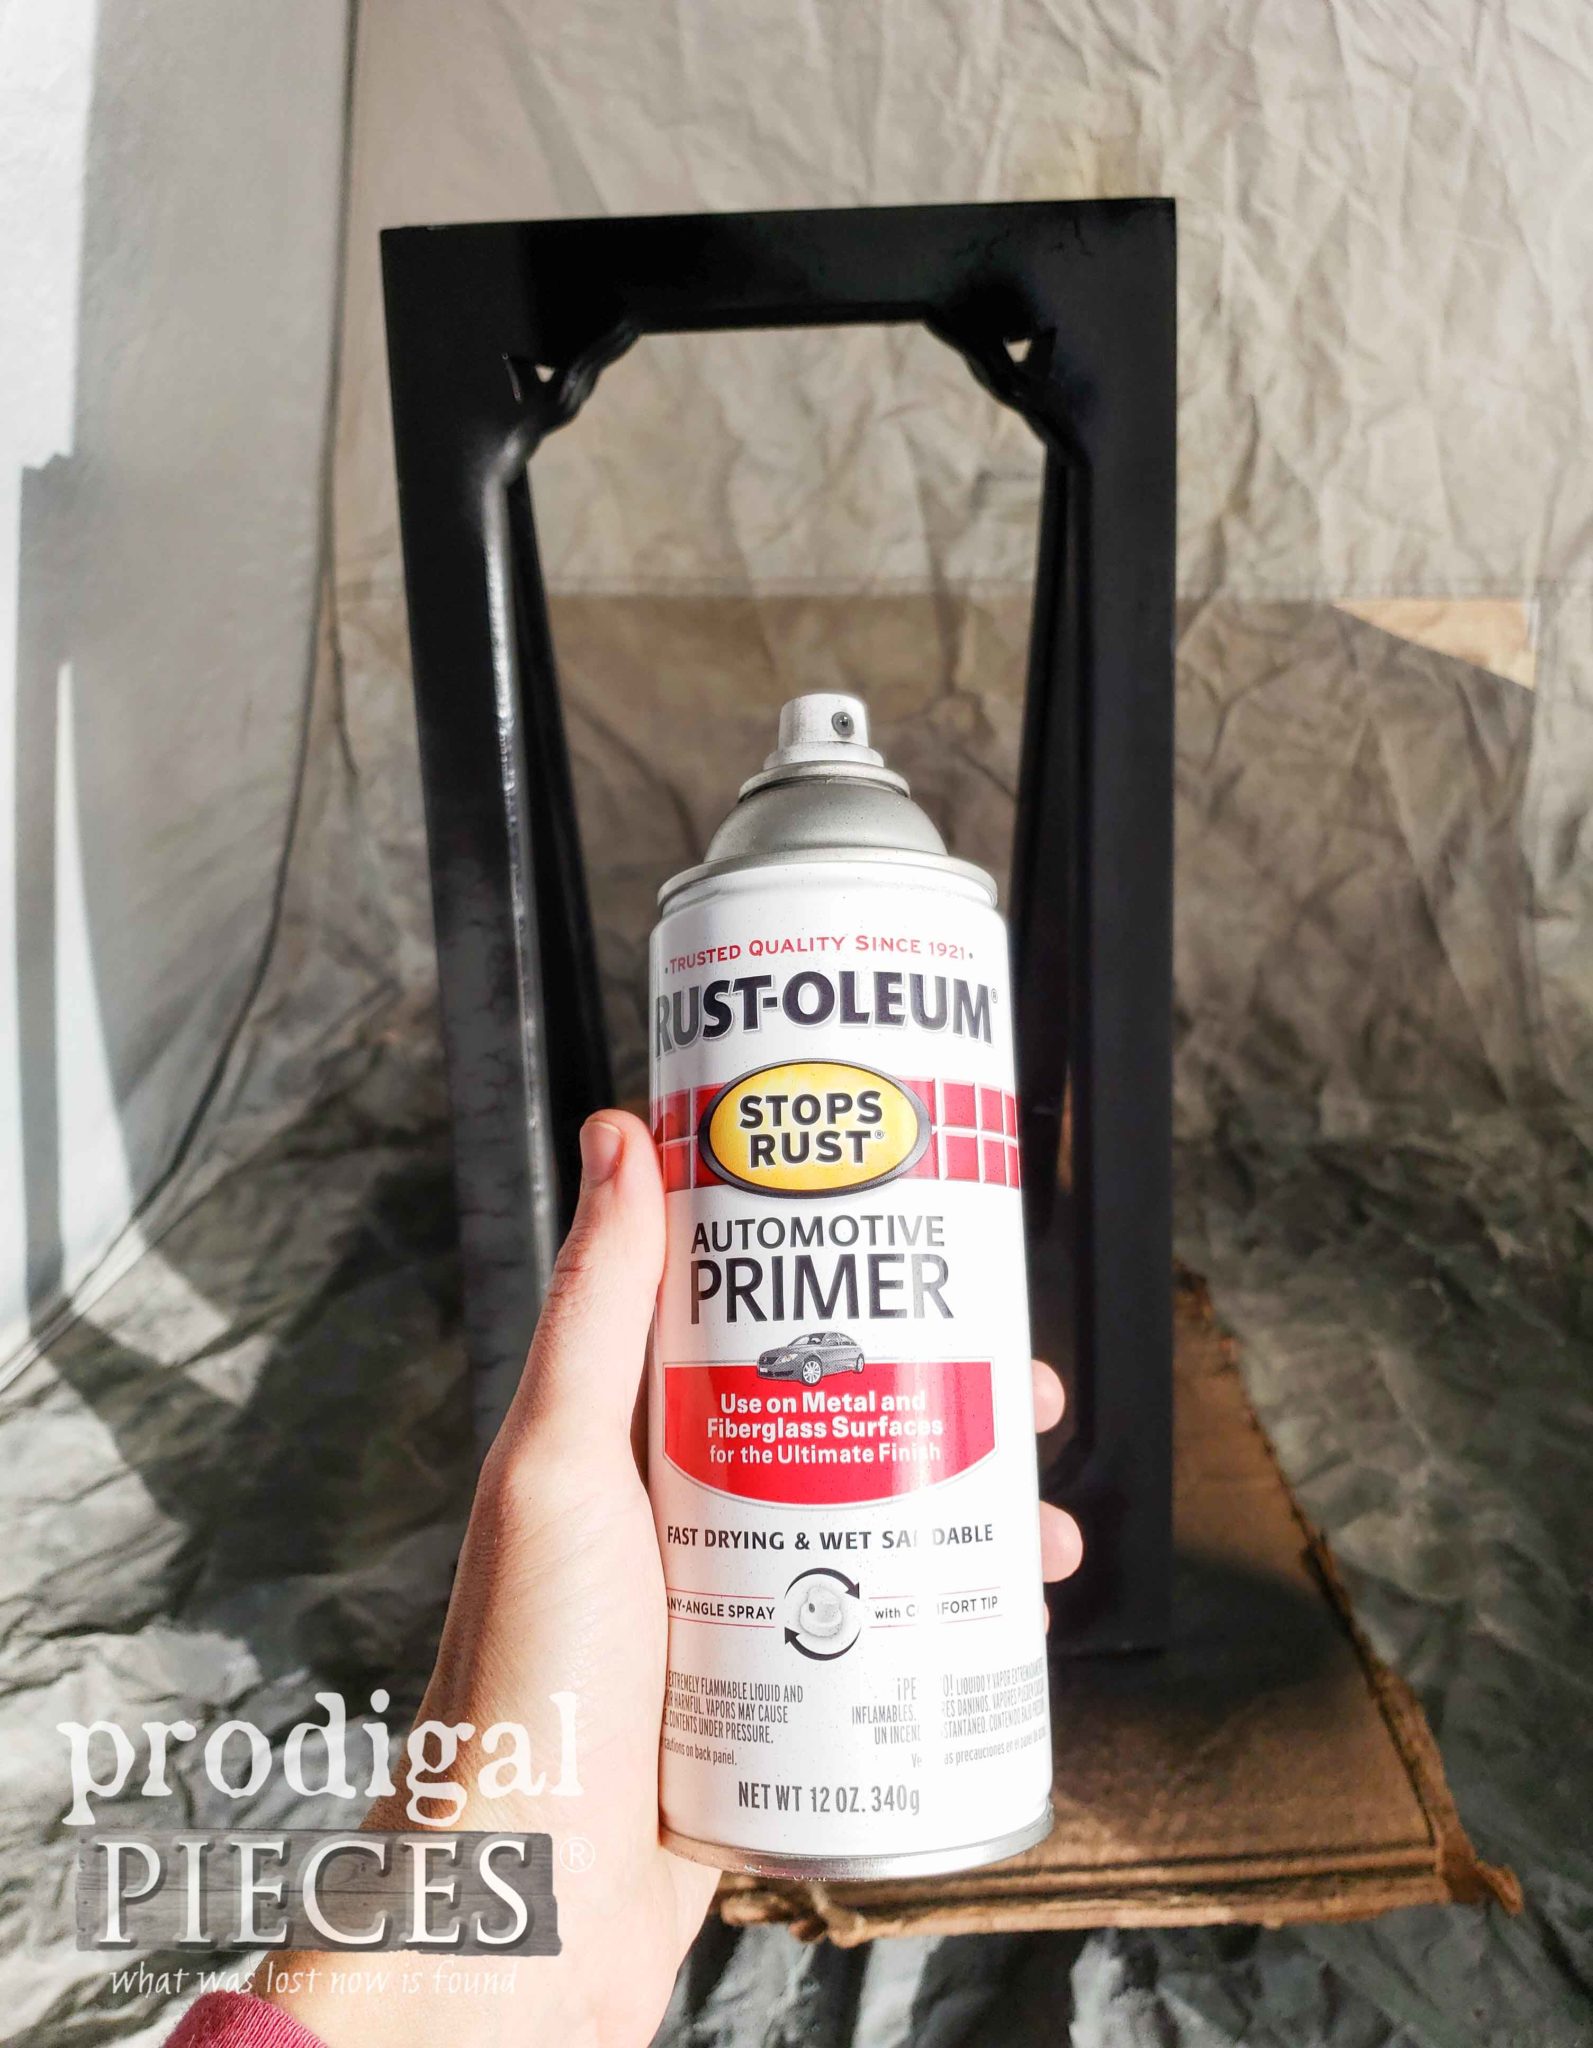 Rustoleum Flat Gray Spray Paint Primer for Upcycled Old Christmas Decor | prodigalpieces.com